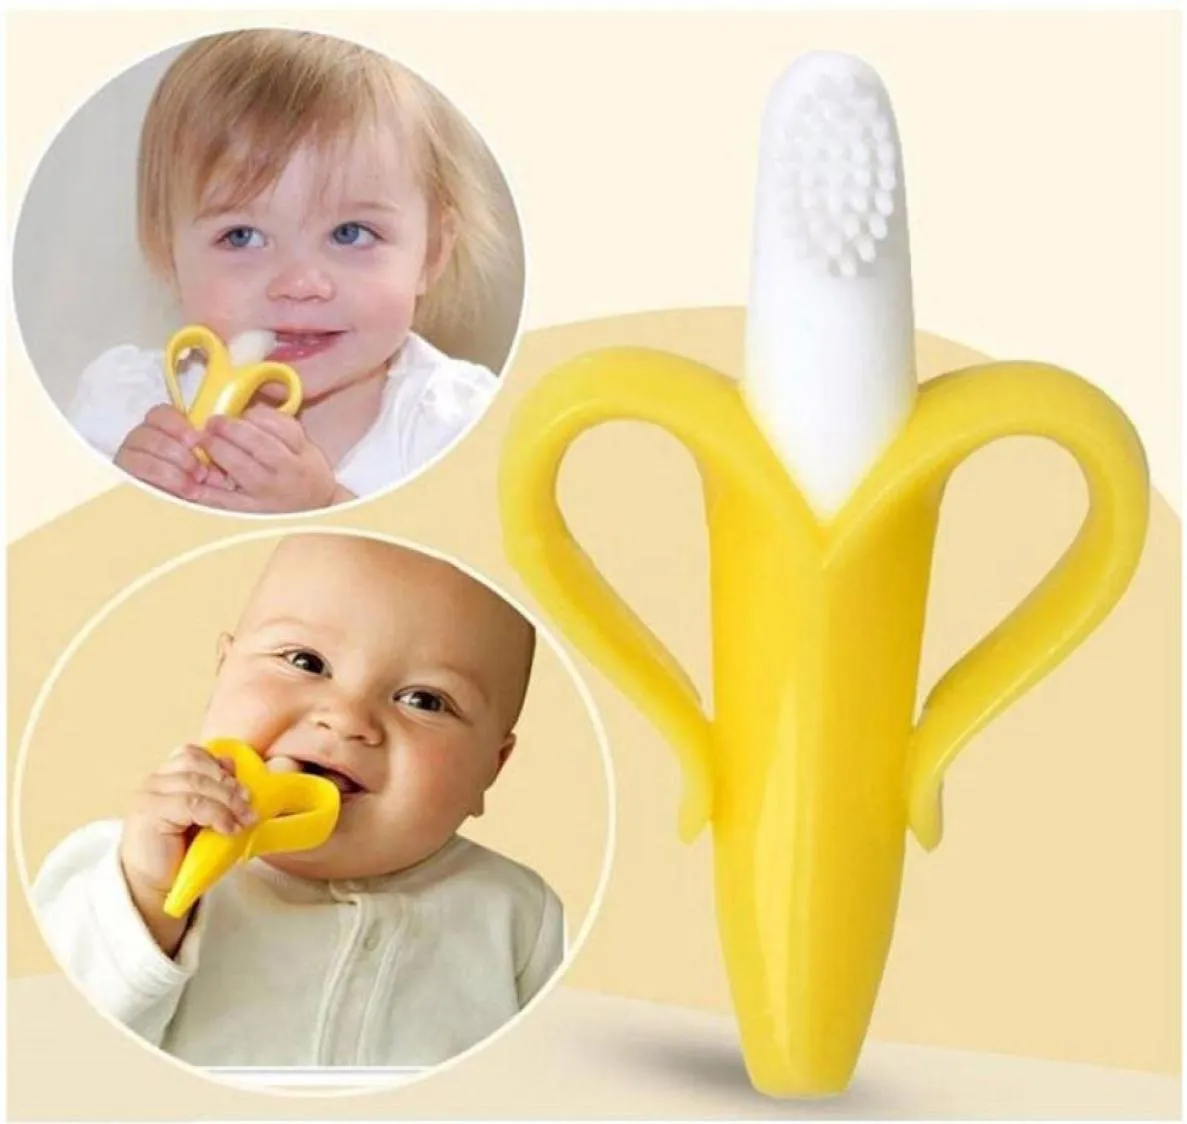 Newborn Silicone Toothbrush Baby Teether Teething Ring Kids Teether Children Chewing Environmentally Safe High Quality C181126016702187